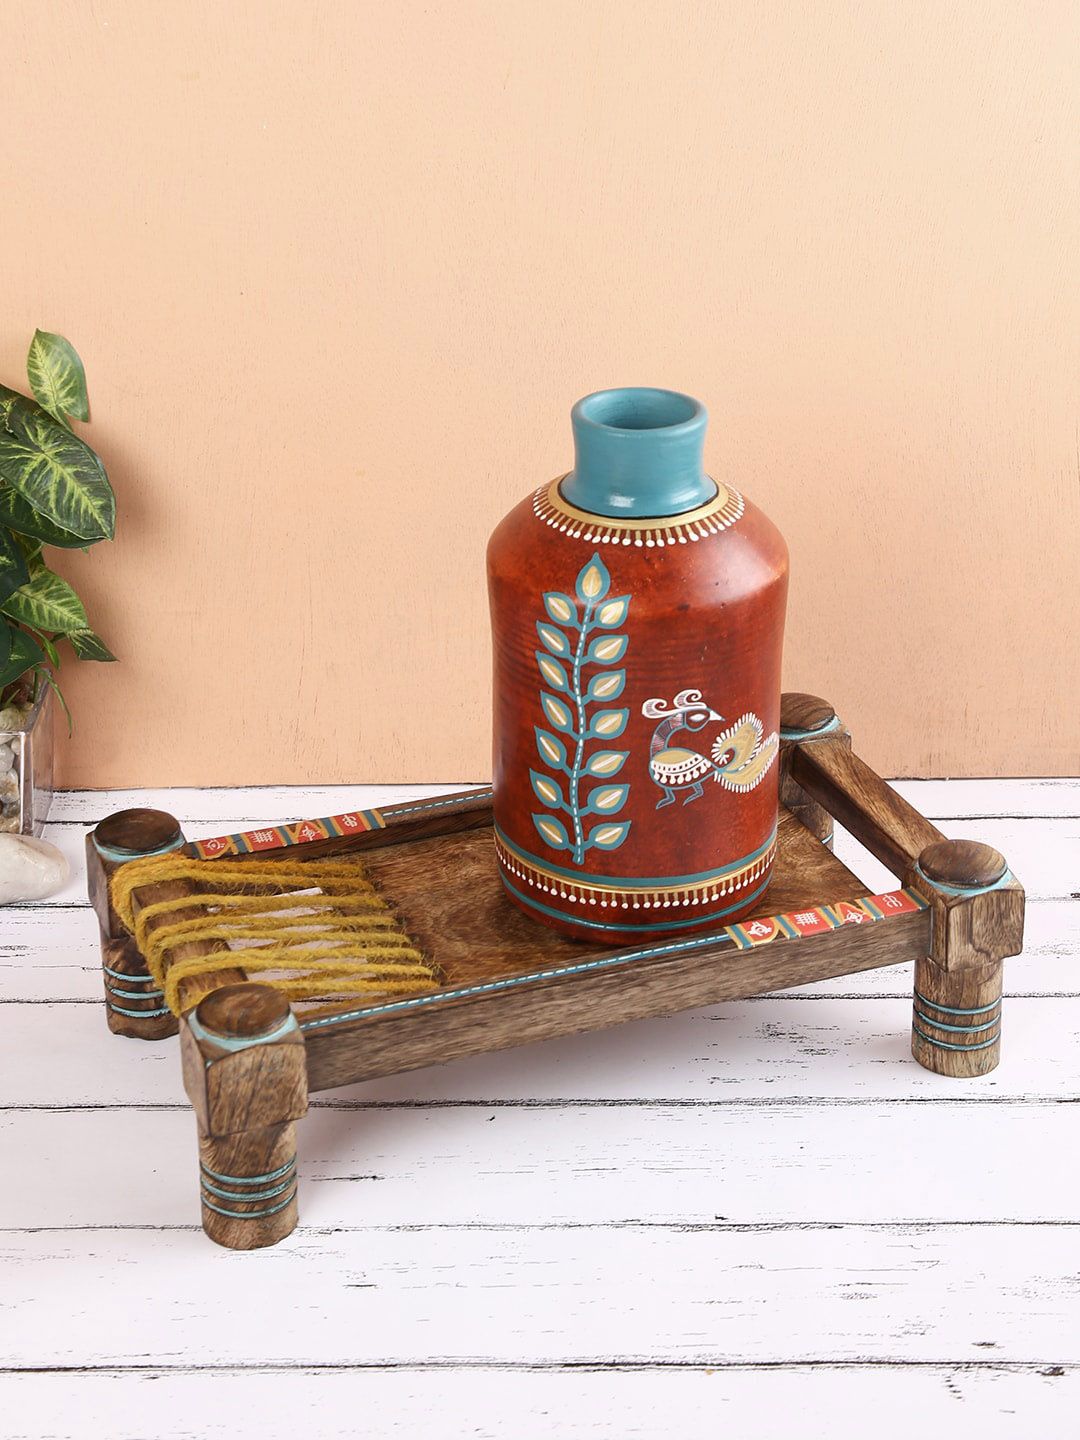 Aapno Rajasthan Rust Red & Blue Vase with Traditional Khaat Price in India